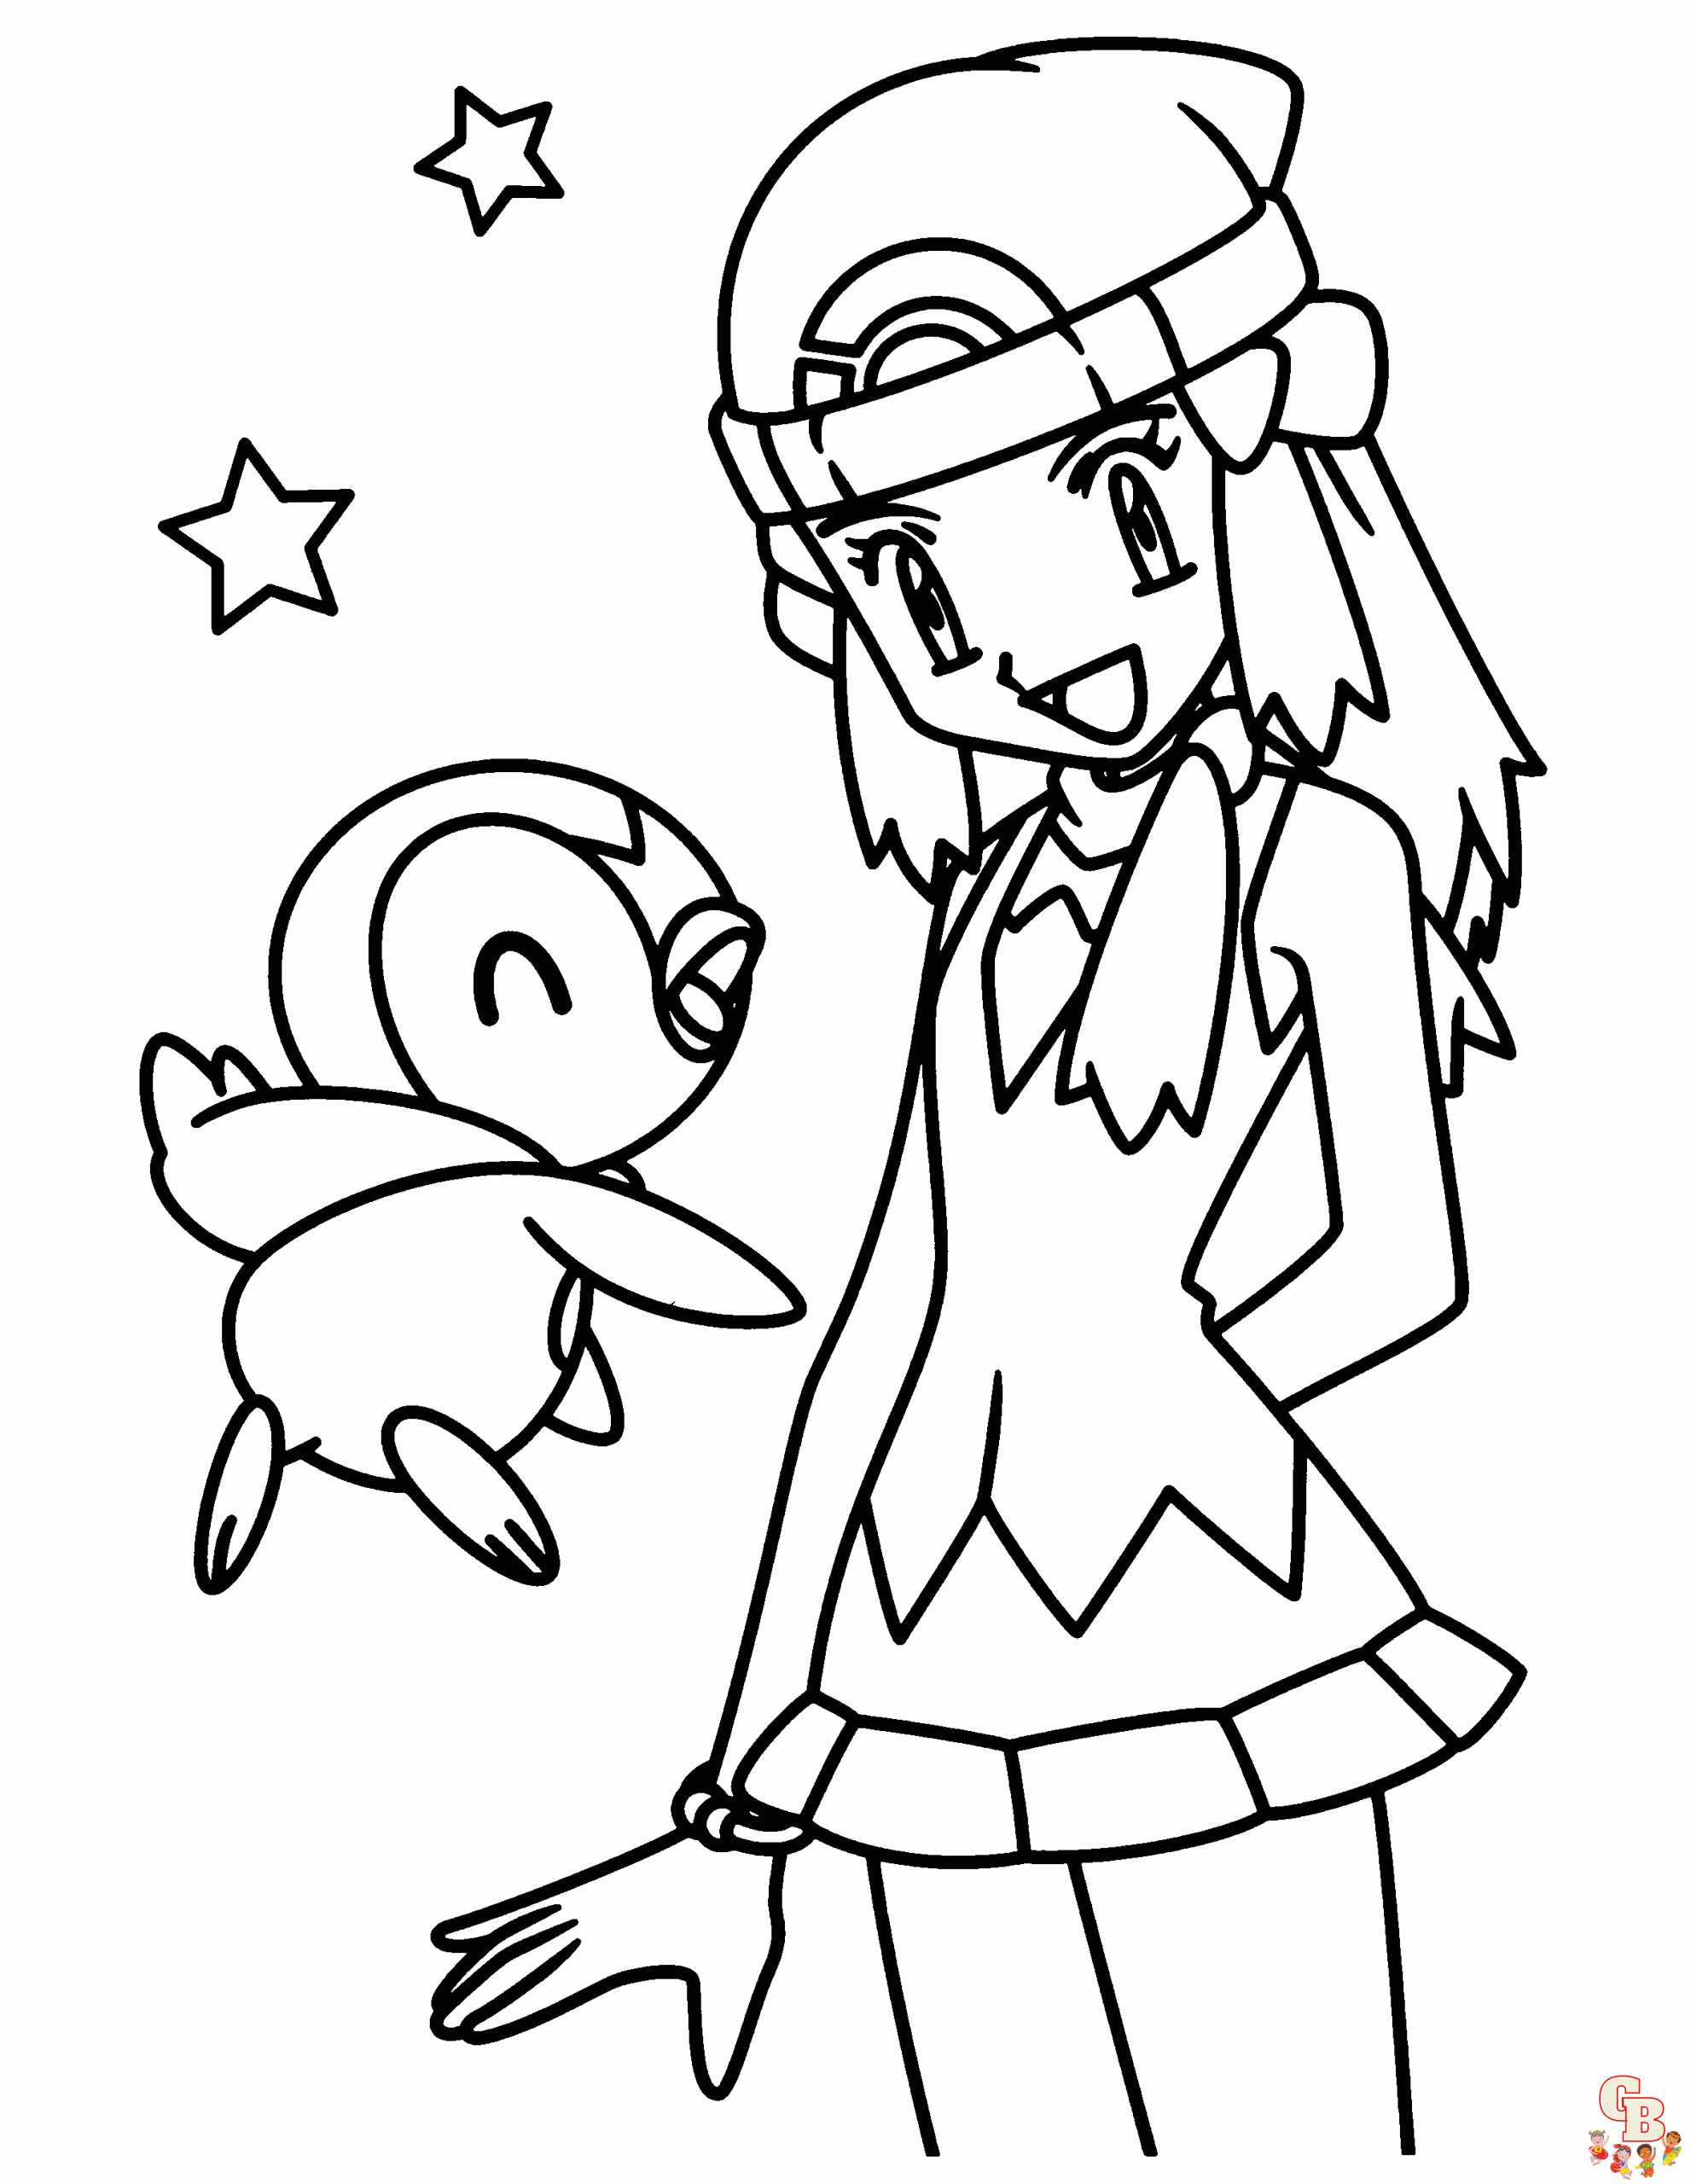 Cute Pokemon coloring pages 7 1